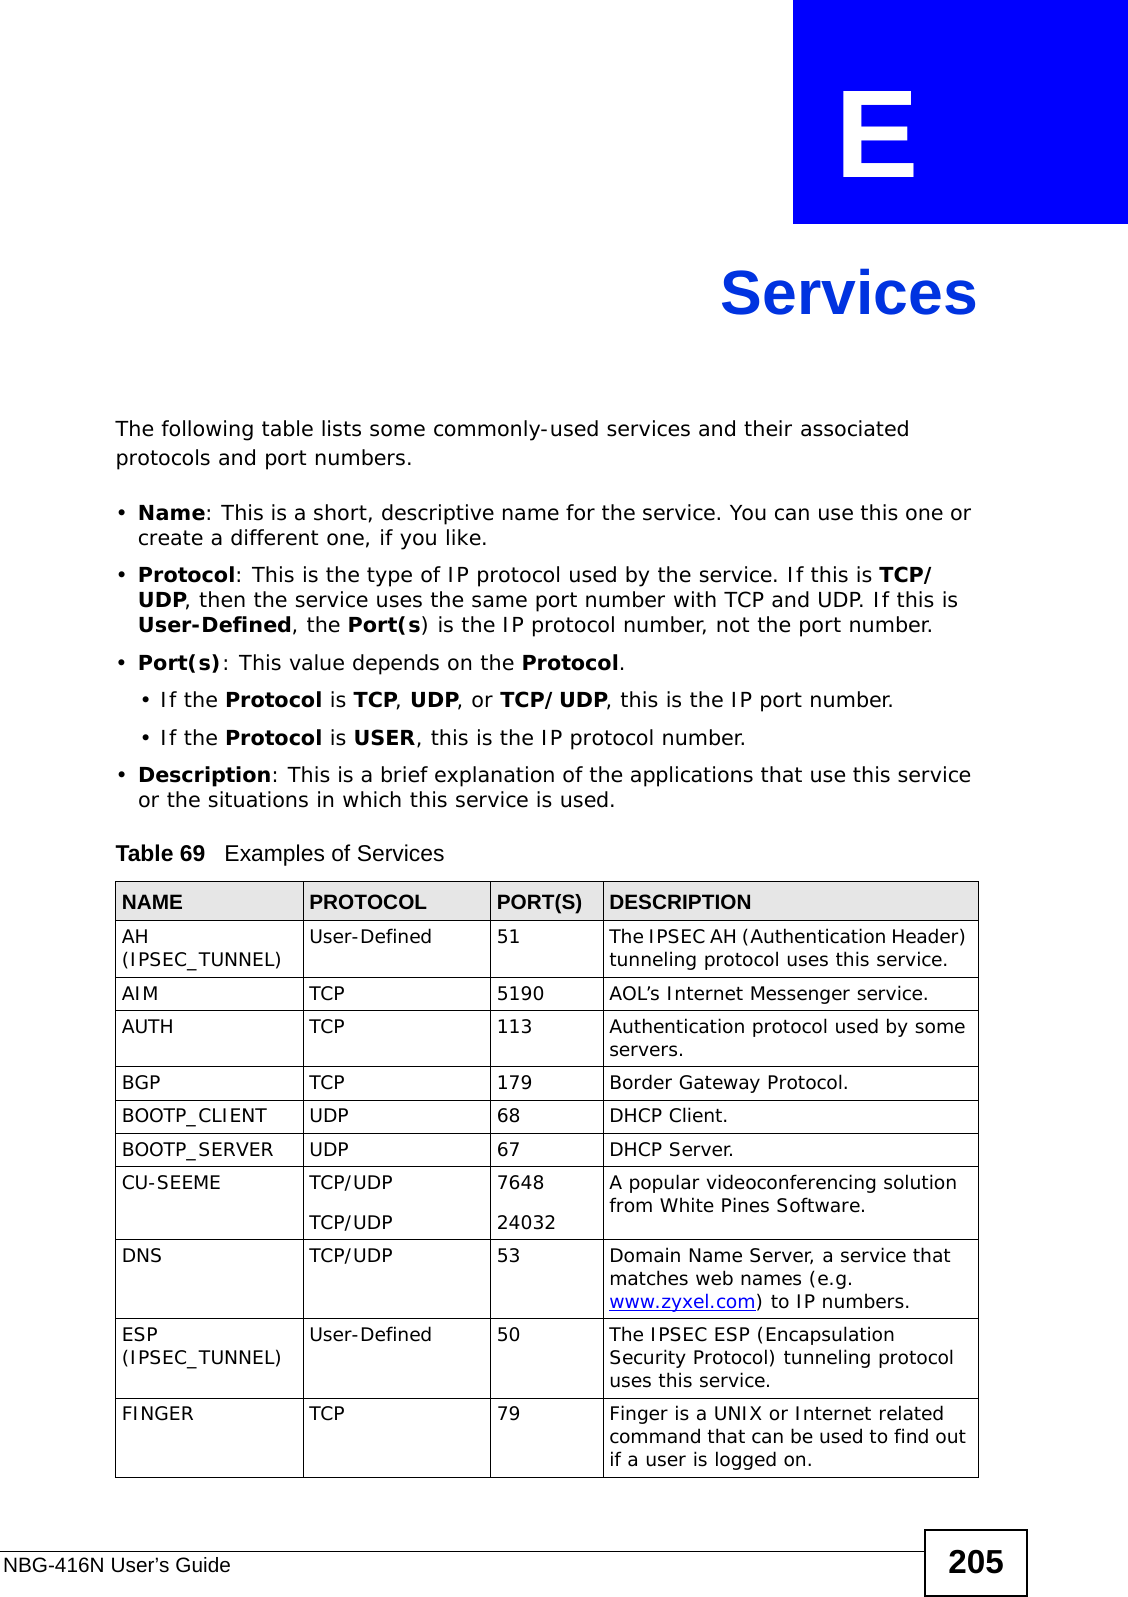 NBG-416N User’s Guide 205APPENDIX  E ServicesThe following table lists some commonly-used services and their associated protocols and port numbers.•Name: This is a short, descriptive name for the service. You can use this one or create a different one, if you like.•Protocol: This is the type of IP protocol used by the service. If this is TCP/UDP, then the service uses the same port number with TCP and UDP. If this is User-Defined, the Port(s) is the IP protocol number, not the port number.•Port(s): This value depends on the Protocol.•If the Protocol is TCP, UDP, or TCP/UDP, this is the IP port number.•If the Protocol is USER, this is the IP protocol number.•Description: This is a brief explanation of the applications that use this service or the situations in which this service is used.Table 69   Examples of ServicesNAME PROTOCOL PORT(S) DESCRIPTIONAH (IPSEC_TUNNEL) User-Defined 51 The IPSEC AH (Authentication Header) tunneling protocol uses this service.AIM TCP 5190 AOL’s Internet Messenger service.AUTH TCP 113 Authentication protocol used by some servers.BGP TCP 179 Border Gateway Protocol.BOOTP_CLIENT UDP 68 DHCP Client.BOOTP_SERVER UDP 67 DHCP Server.CU-SEEME TCP/UDPTCP/UDP 764824032A popular videoconferencing solution from White Pines Software.DNS TCP/UDP 53 Domain Name Server, a service that matches web names (e.g. www.zyxel.com) to IP numbers.ESP (IPSEC_TUNNEL) User-Defined 50 The IPSEC ESP (Encapsulation Security Protocol) tunneling protocol uses this service.FINGER TCP 79 Finger is a UNIX or Internet related command that can be used to find out if a user is logged on.